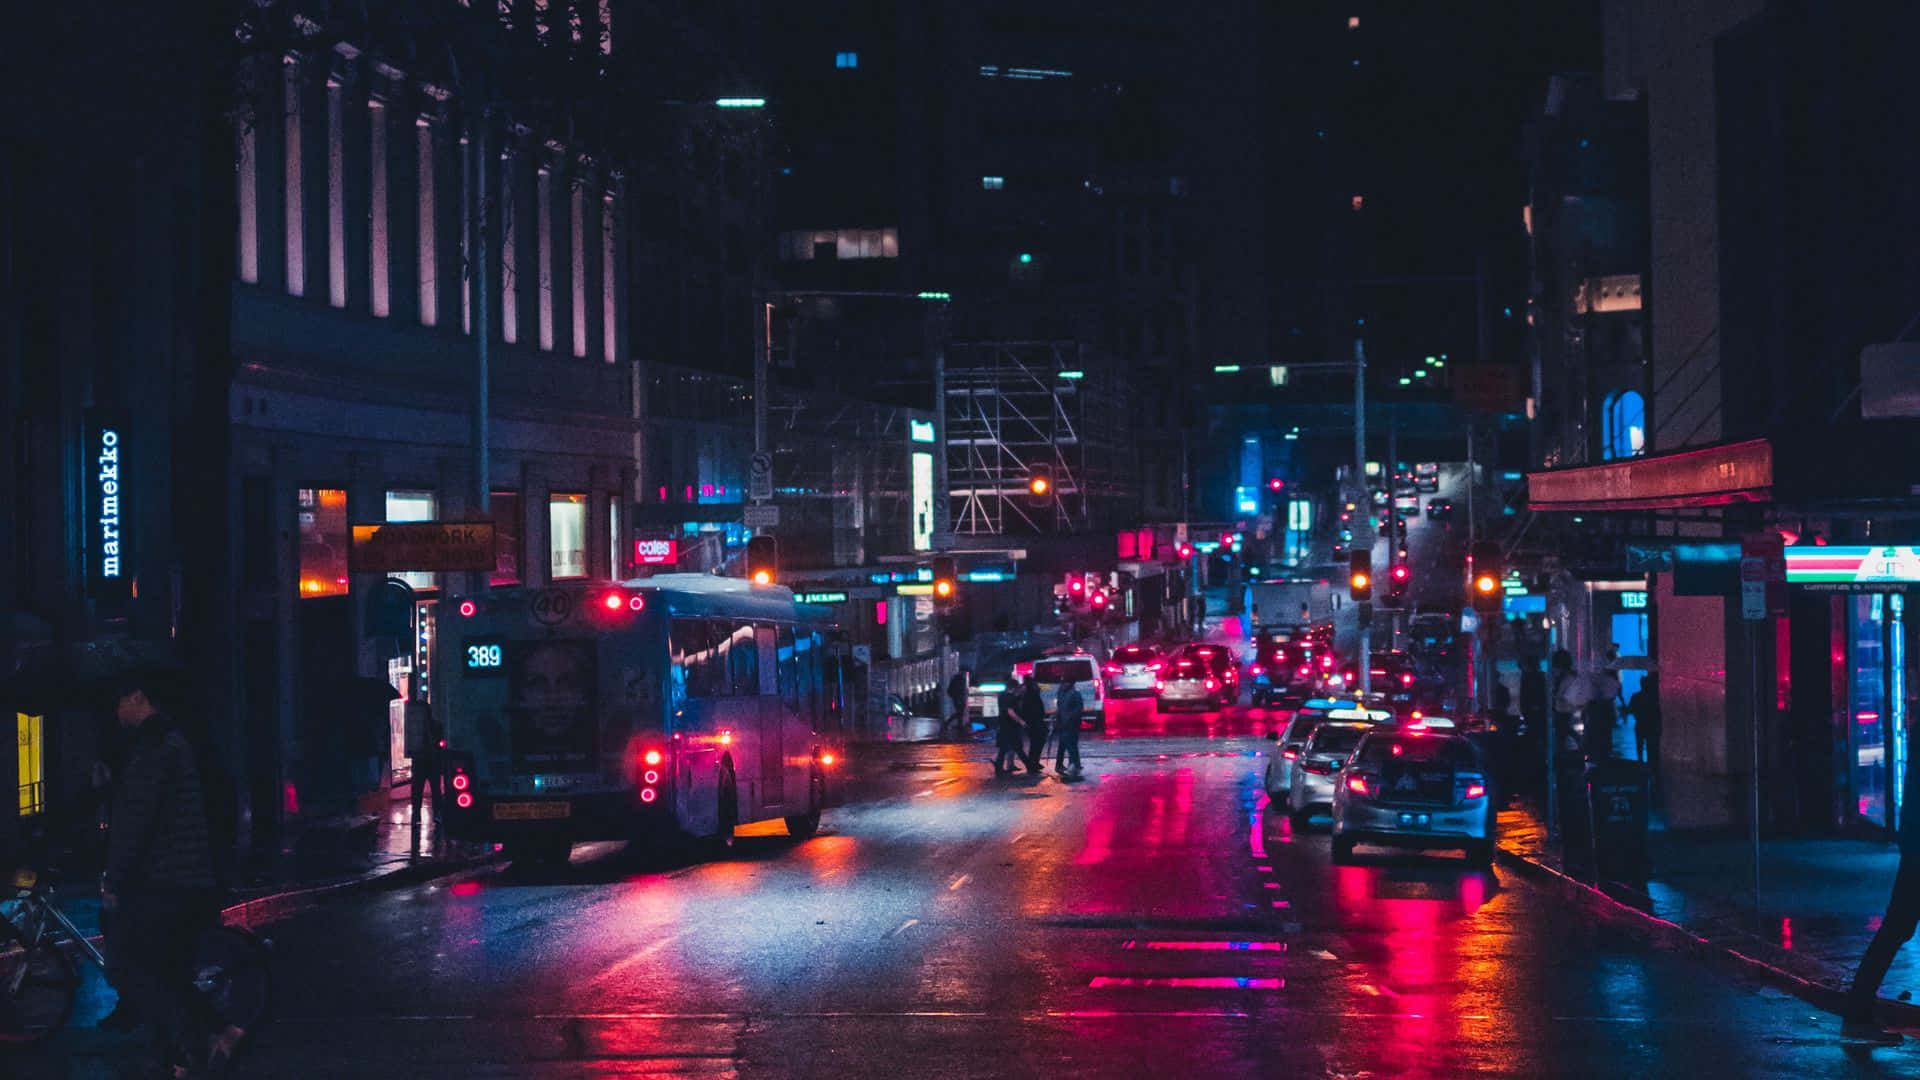 Watch the neon lights flicker and dance in the lively streets of Night City